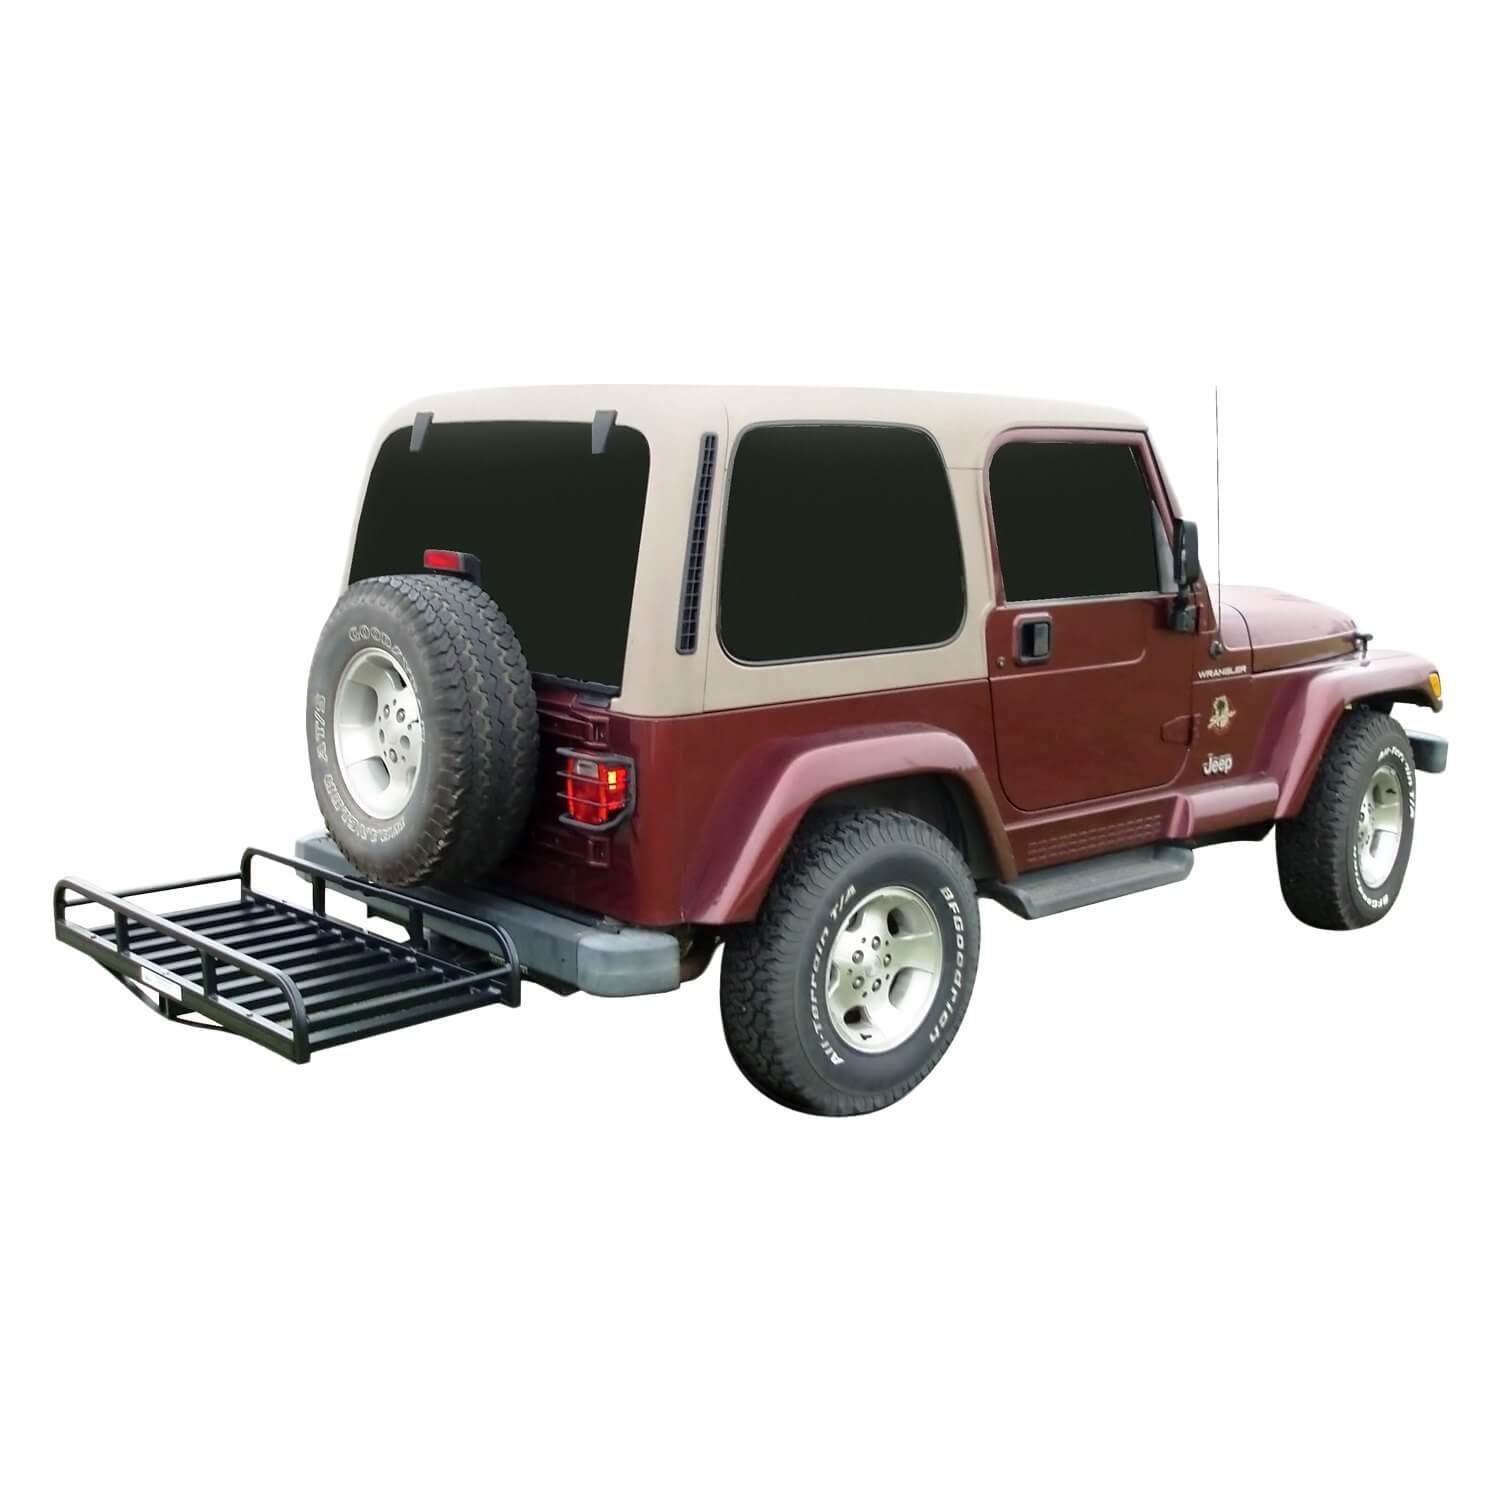 Hitch-N-Ride - Truck Hitch Receiver Cargo Carrier - 33" Bar